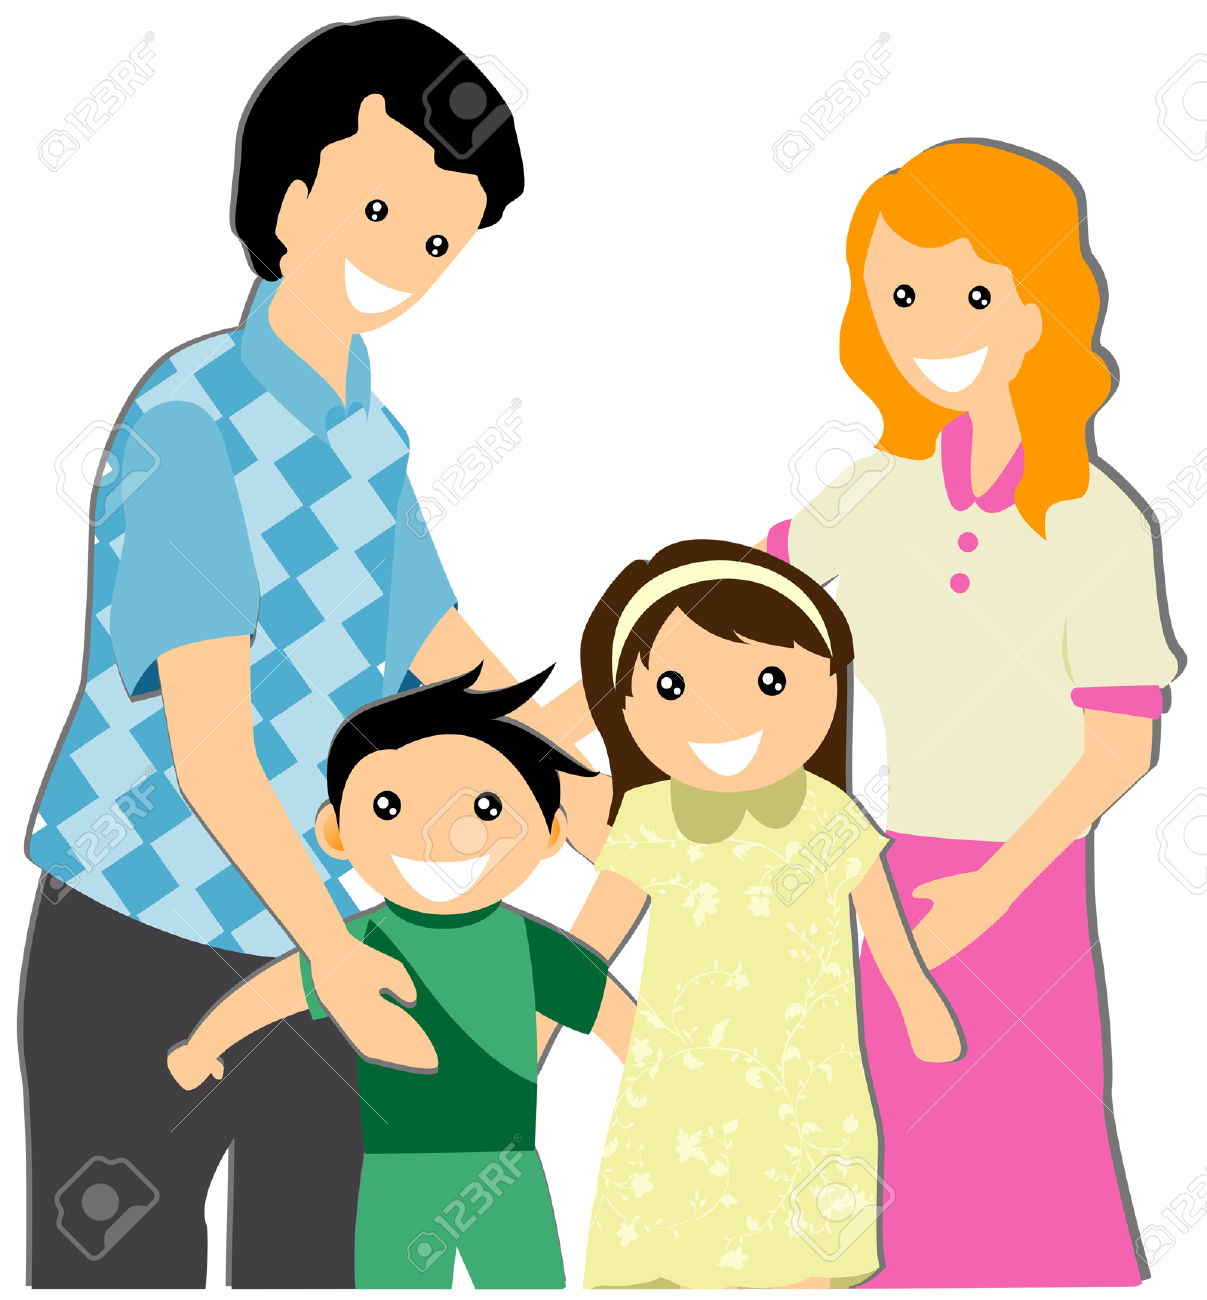 clipart of family - photo #22